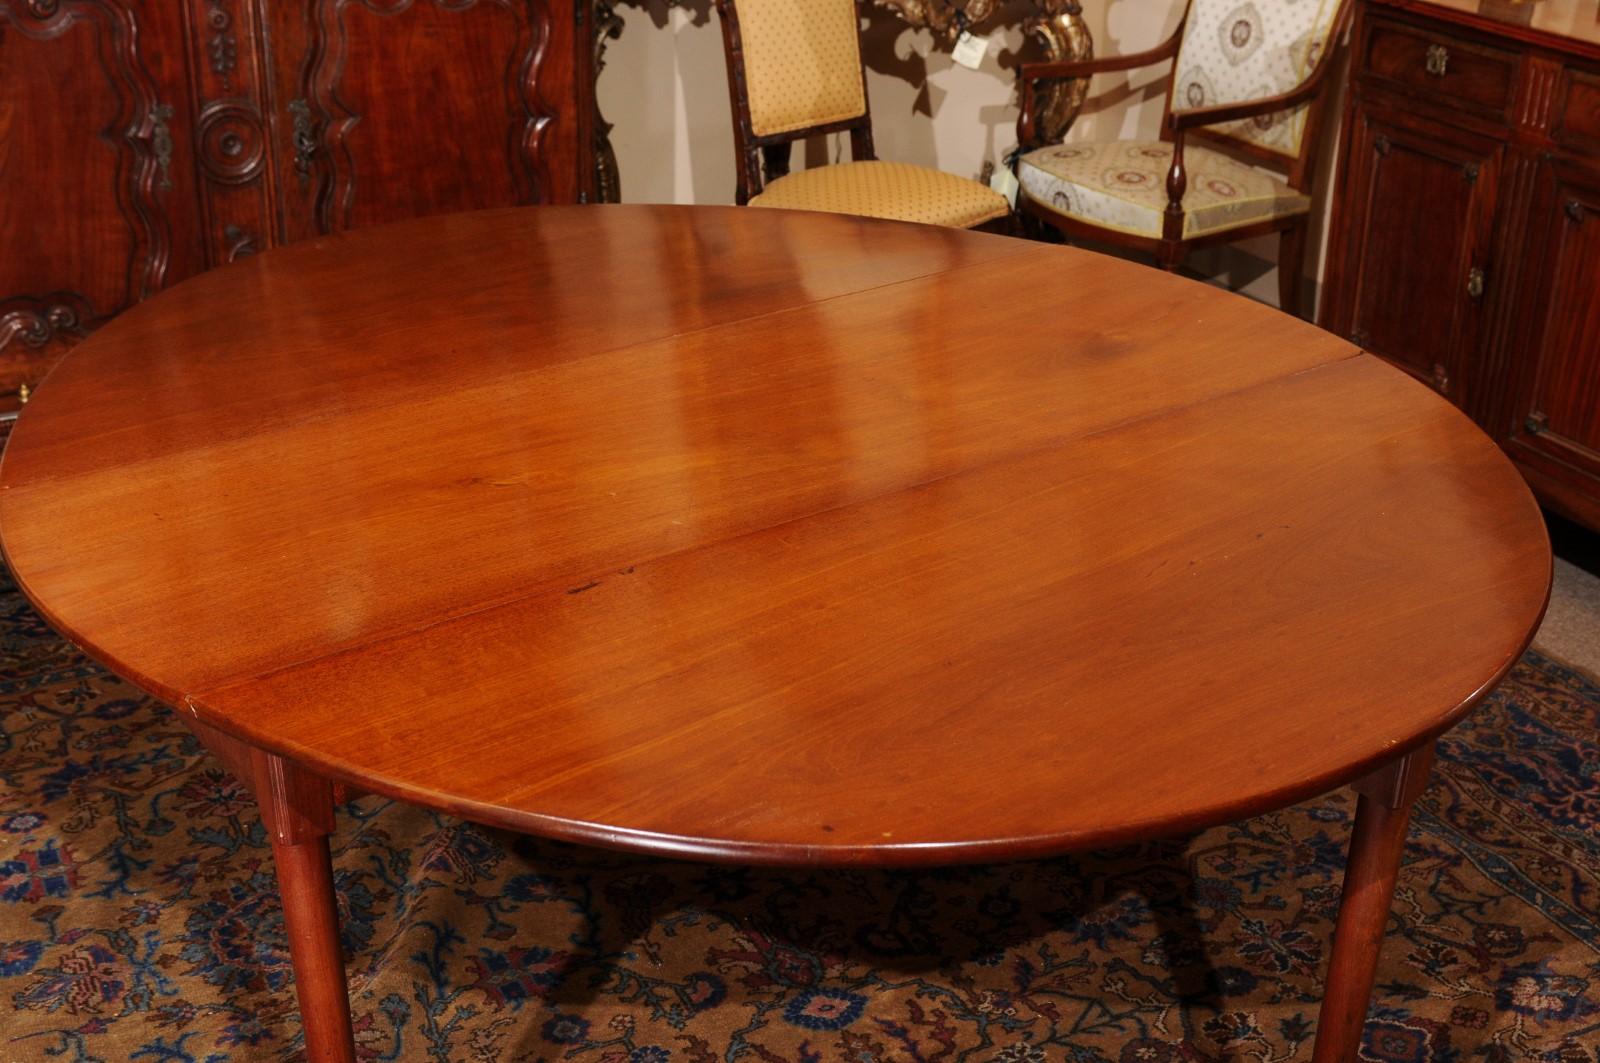  Mid-18th C English George II Mahogany Drop Leaf Oval Dining Table with Pad Feet For Sale 1